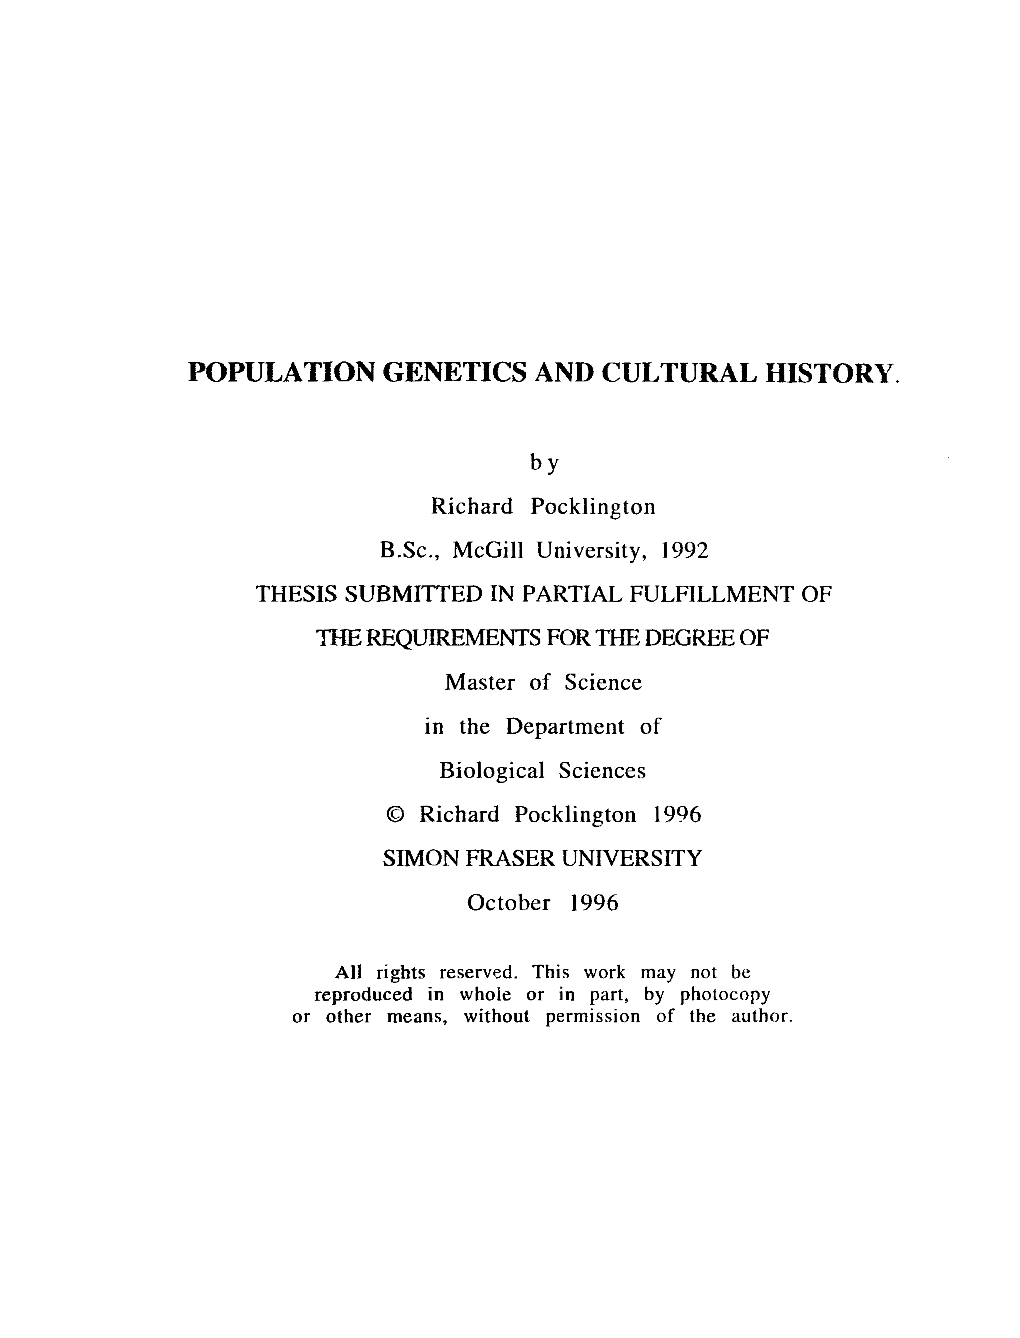 Population Genetics and Cultural History